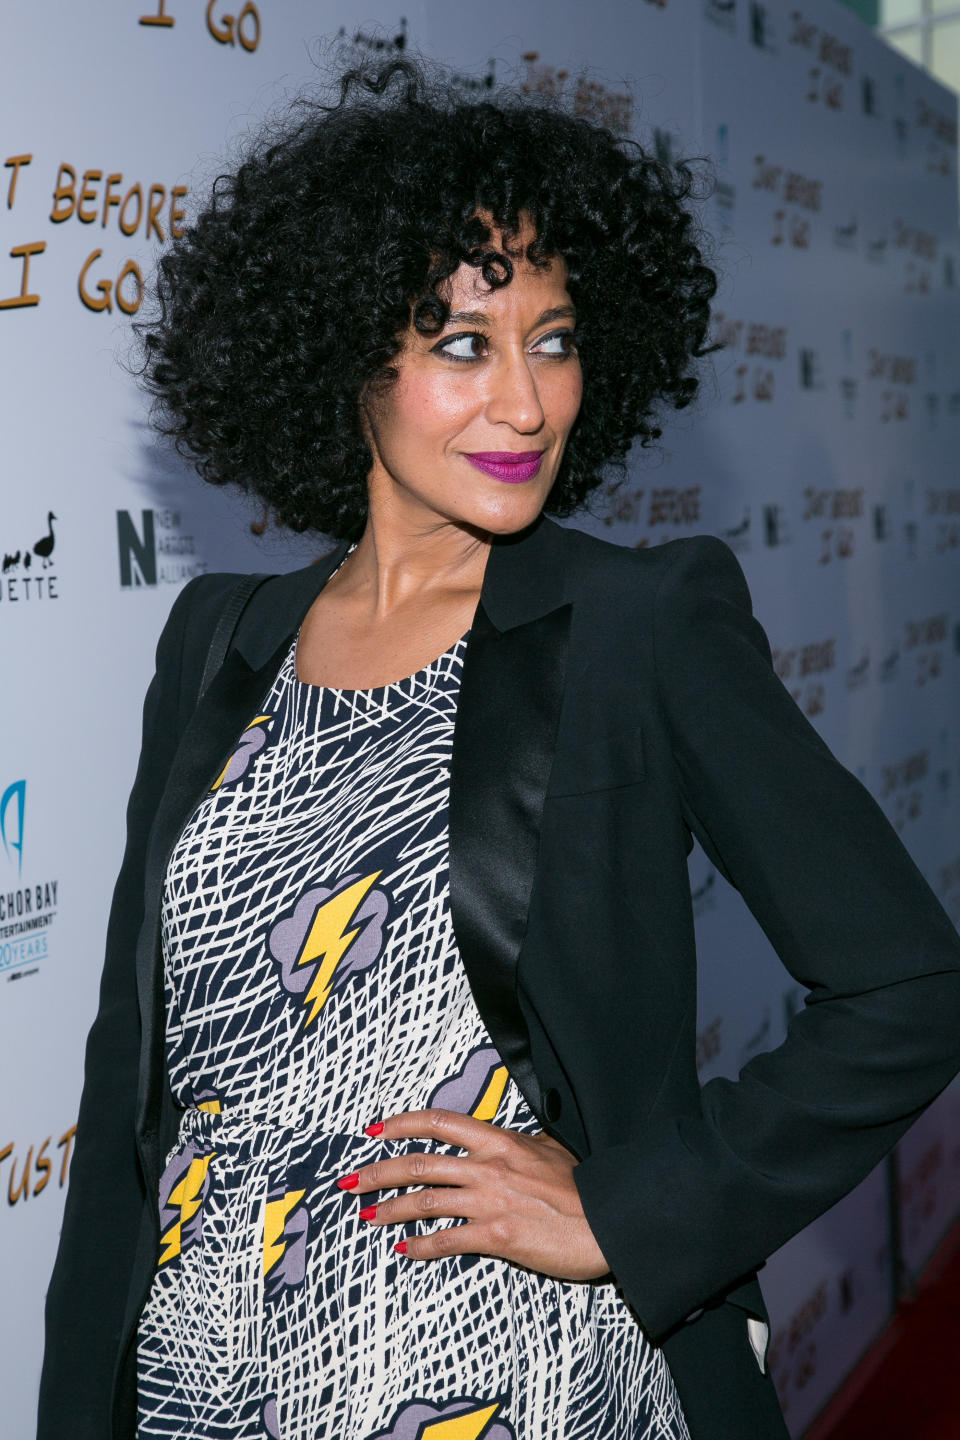 Tracee Ellis Ross attends the LA Screening of "Just Before I Go" at ArcLight Hollywood on Monday, April 20, 2015 in Los Angeles. (Photo by John Salangsang/Invision/AP)